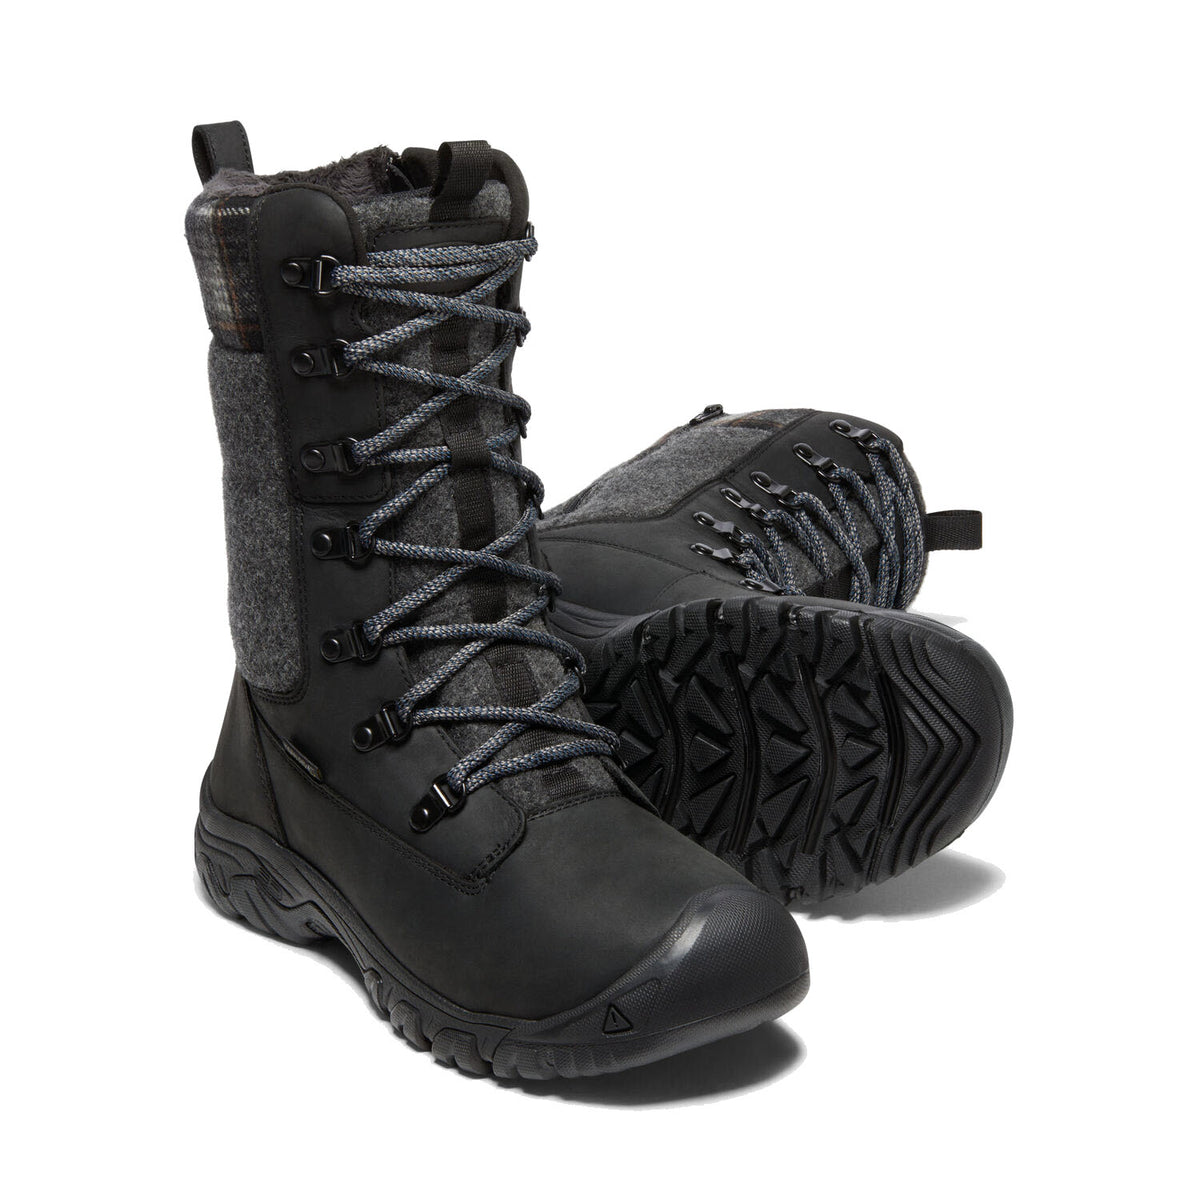 A pair of Keen KEEN GRETA TALL BOOT WP BLACK - WOMENS, featuring a KEEN.DRY membrane and black lace-up design with gray wool detailing on a white background.